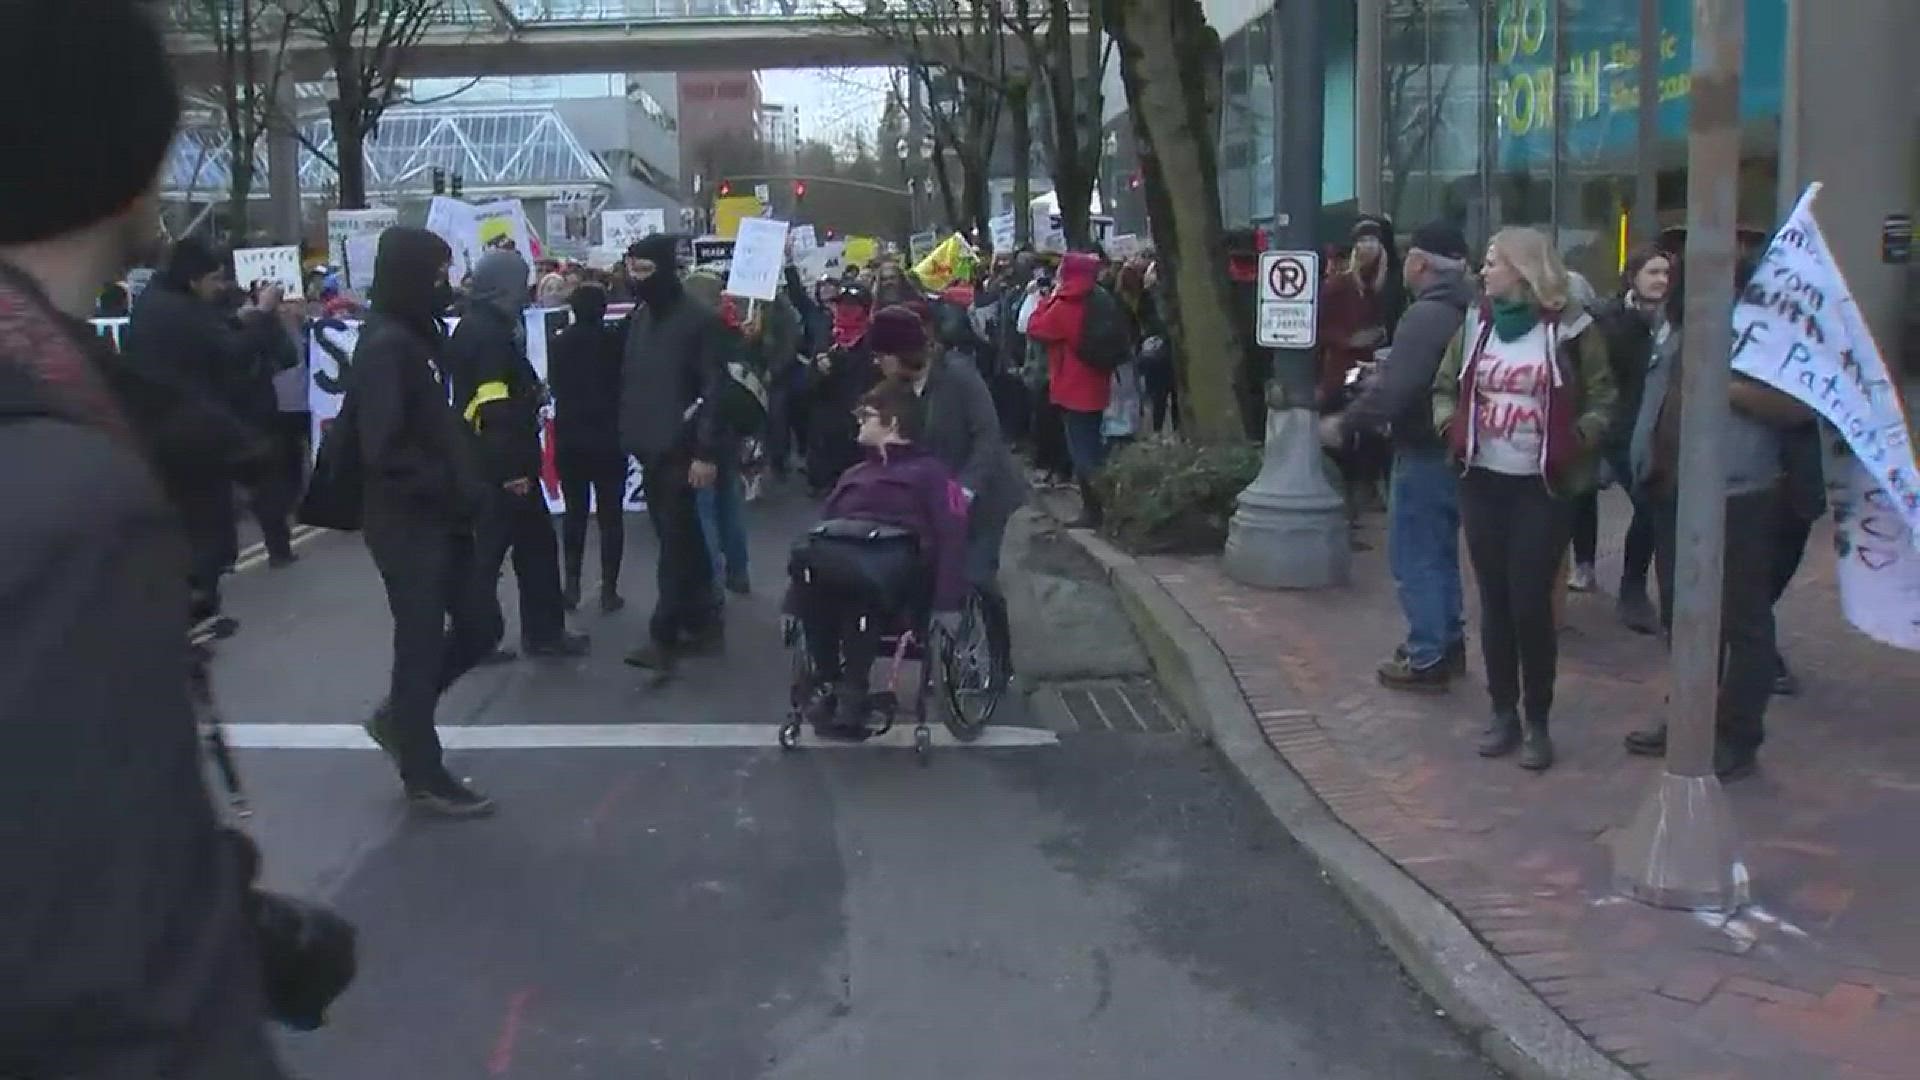 National March for Impeachment demonstrators march in downtown Portland on Jan. 20, 2018